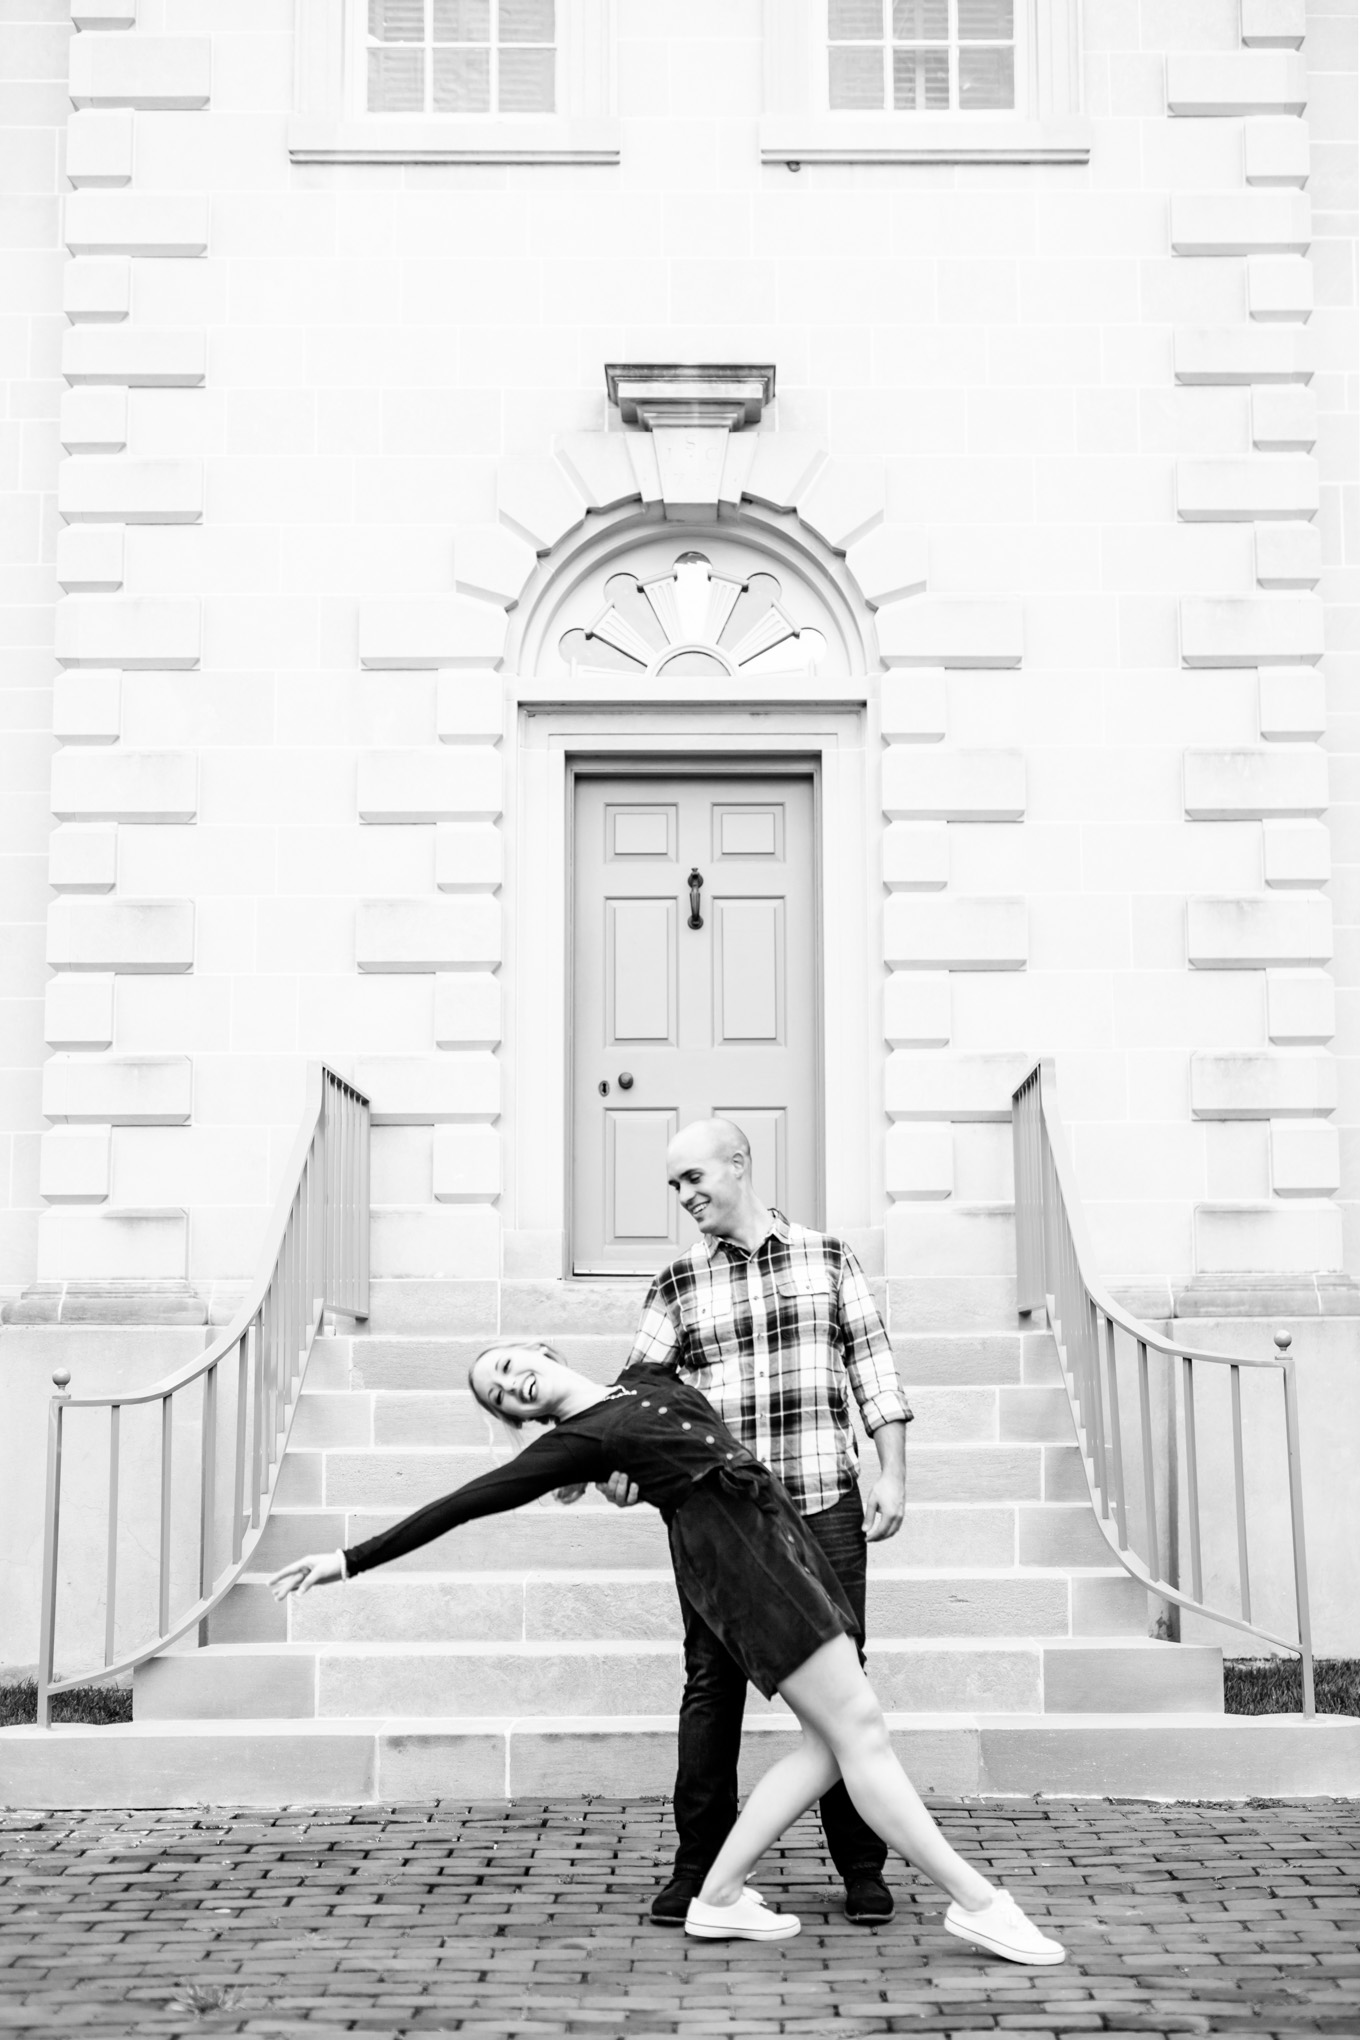 sunrise Old Town Alexandria engagement photos, Alexandria Virginia photographer, D.C. engagement photographer, D.C. wedding photographer, D.C. wedding photography, Old Town Alexandria, Alexandria engagement photos, natural light engagement photos, engagement photos ideas, summer engagement photos, engagement session outfits, classic engagement photos, couple walking, black and white engagement photo, dancing photo, Carlyle House